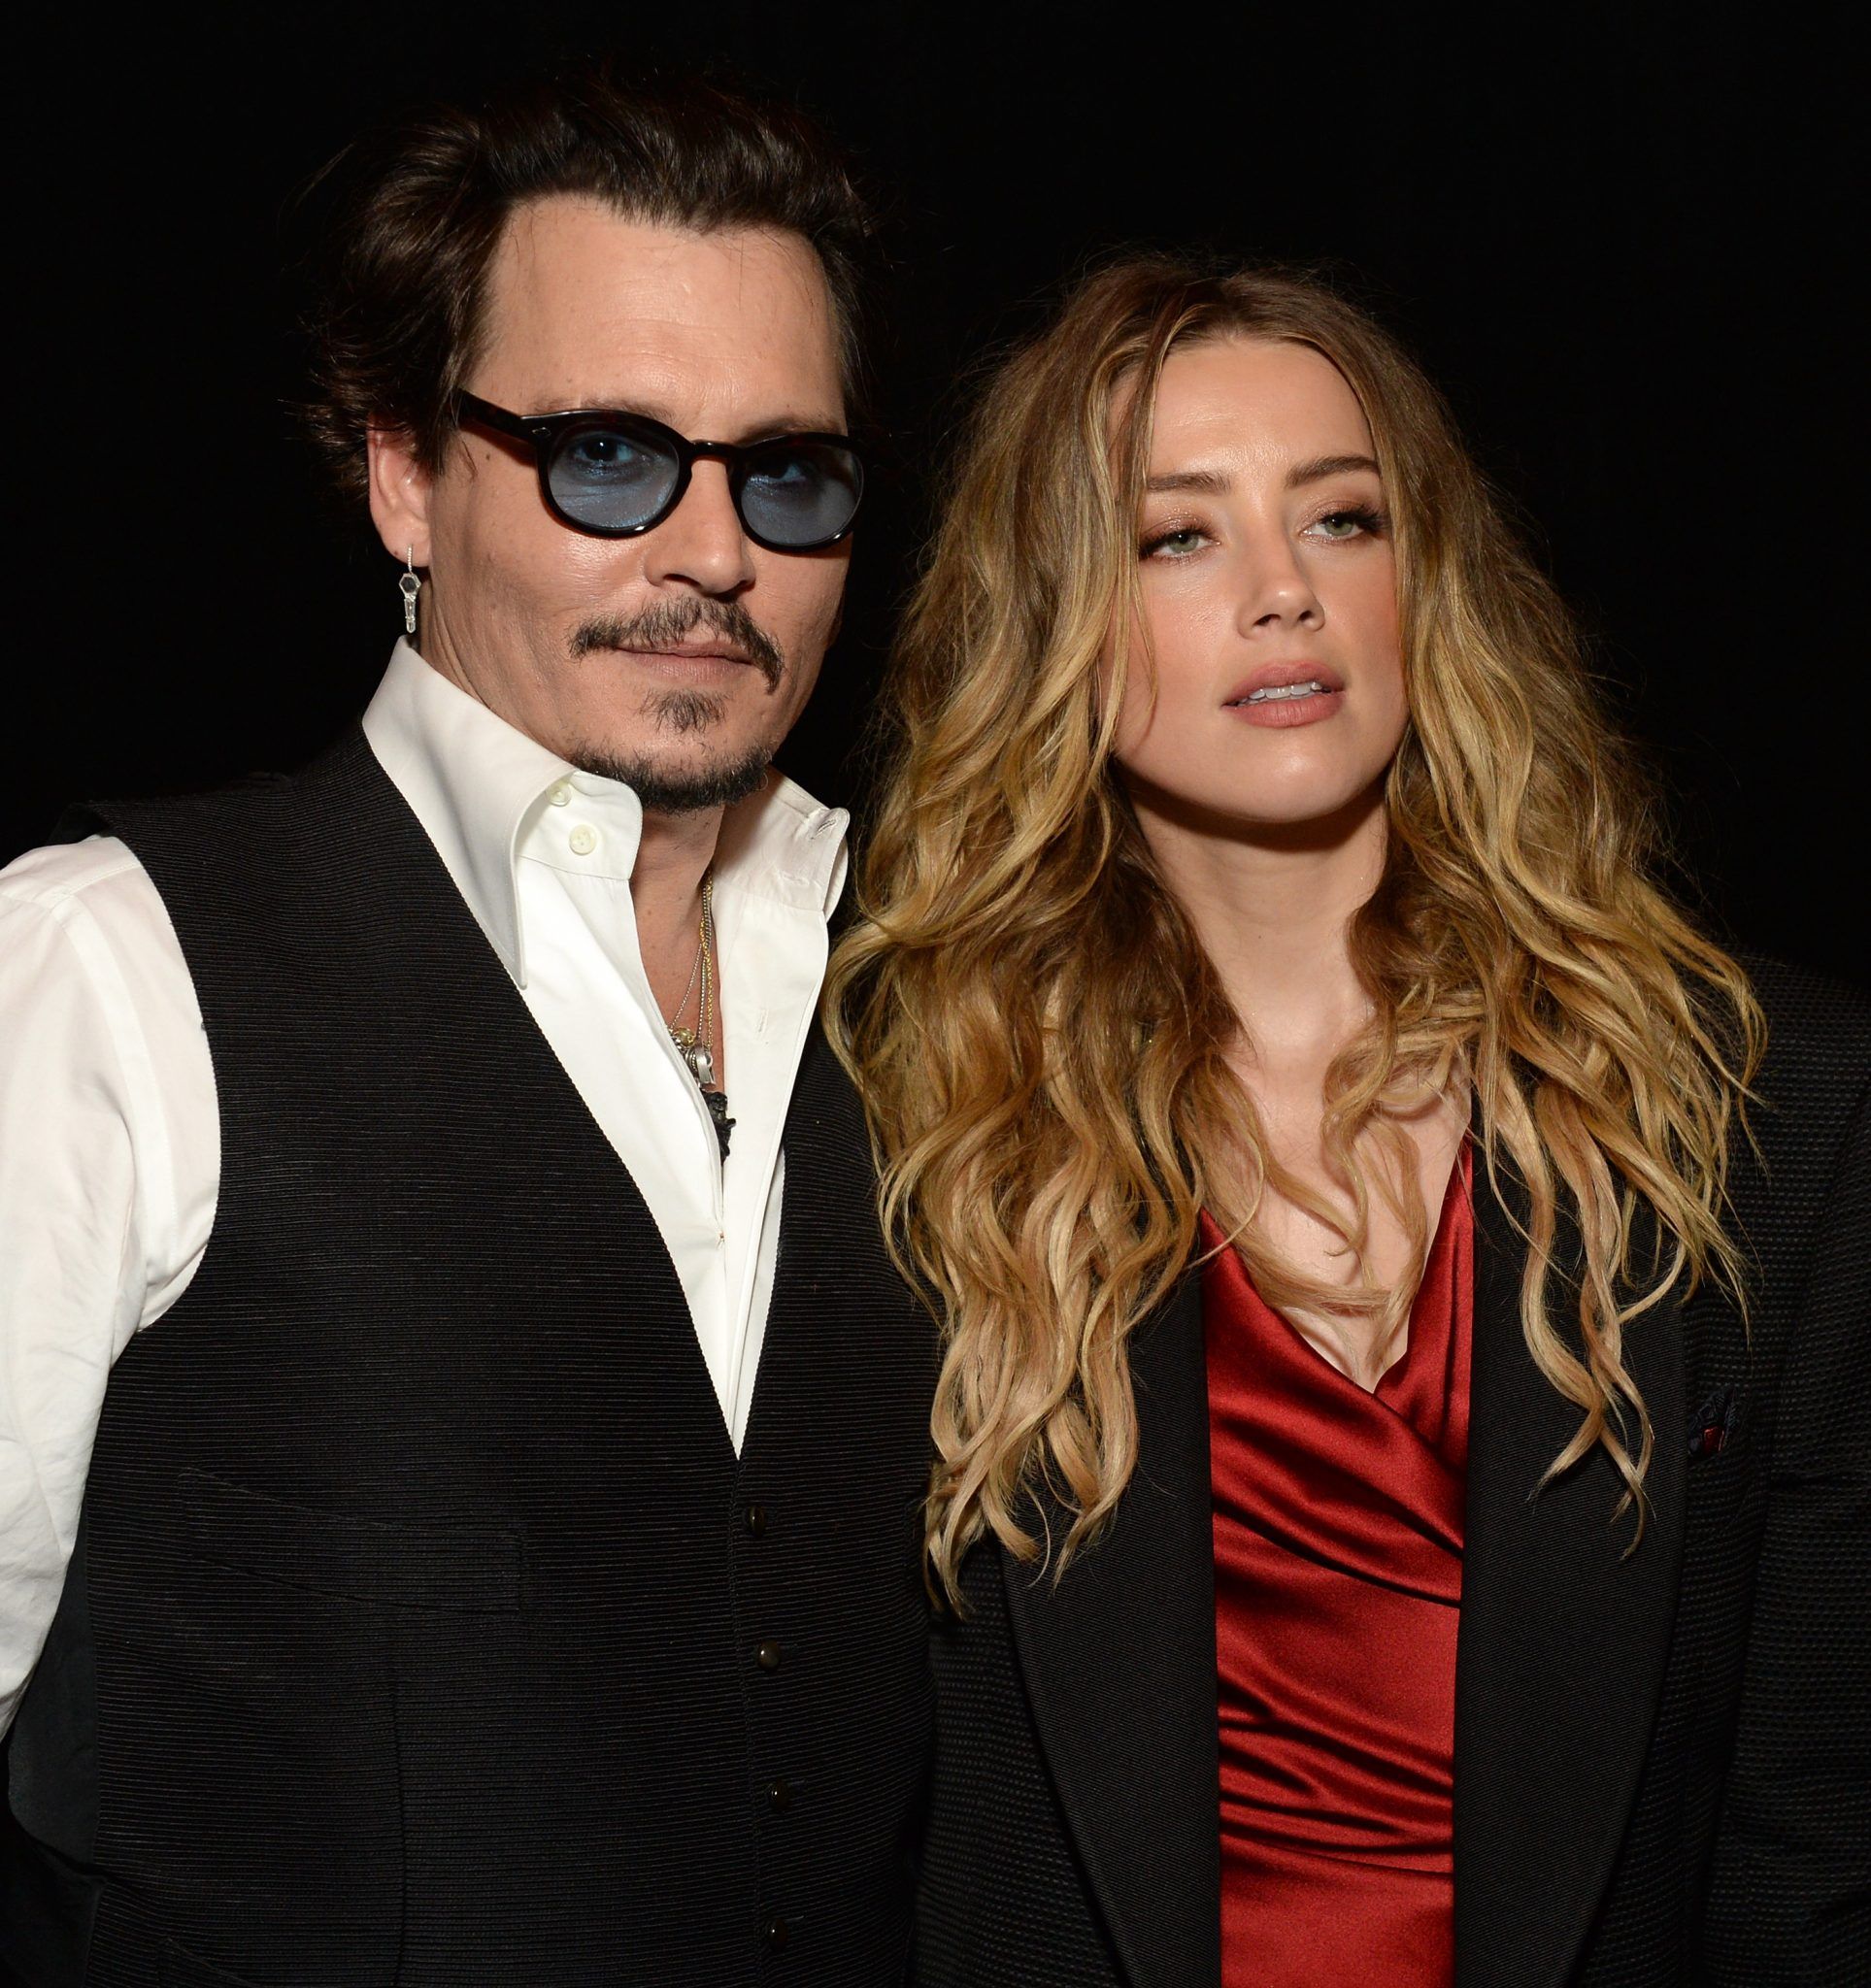 CULVER CITY, CA - JANUARY 09: Actors Johnny Depp and Amber Heard attend The Art of Elysium 2016 HEAVEN Gala presented by Vivienne Westwood & Andreas Kronthaler at 3LABS on January 9, 2016 in Culver City, California. (Photo by Michael Kovac/Getty Images for Art of Elysium)